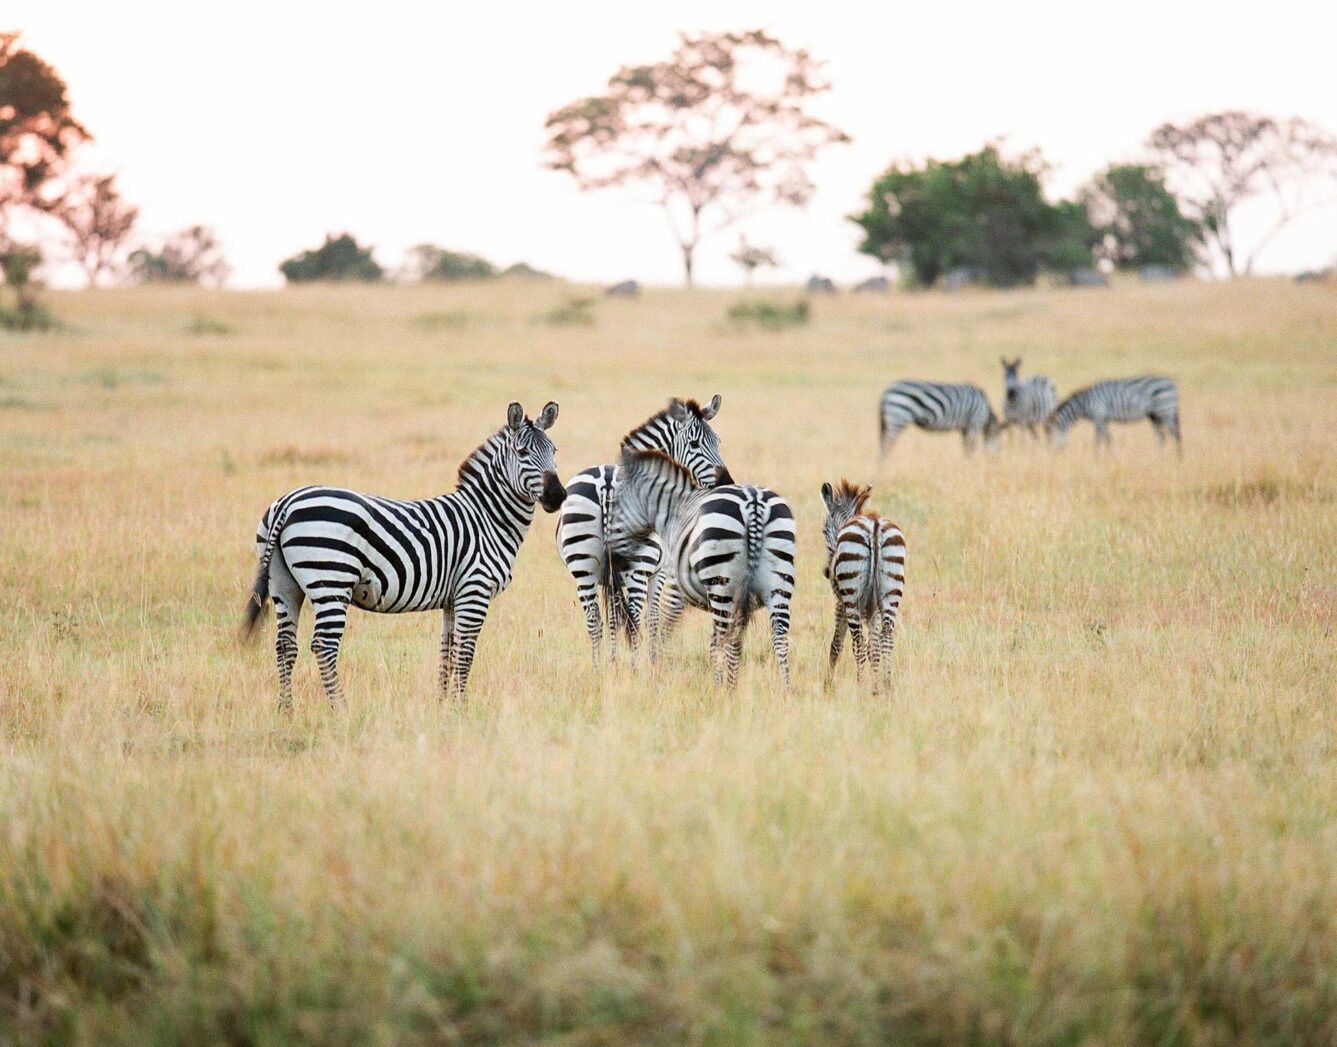 Four zebras stand in the grass